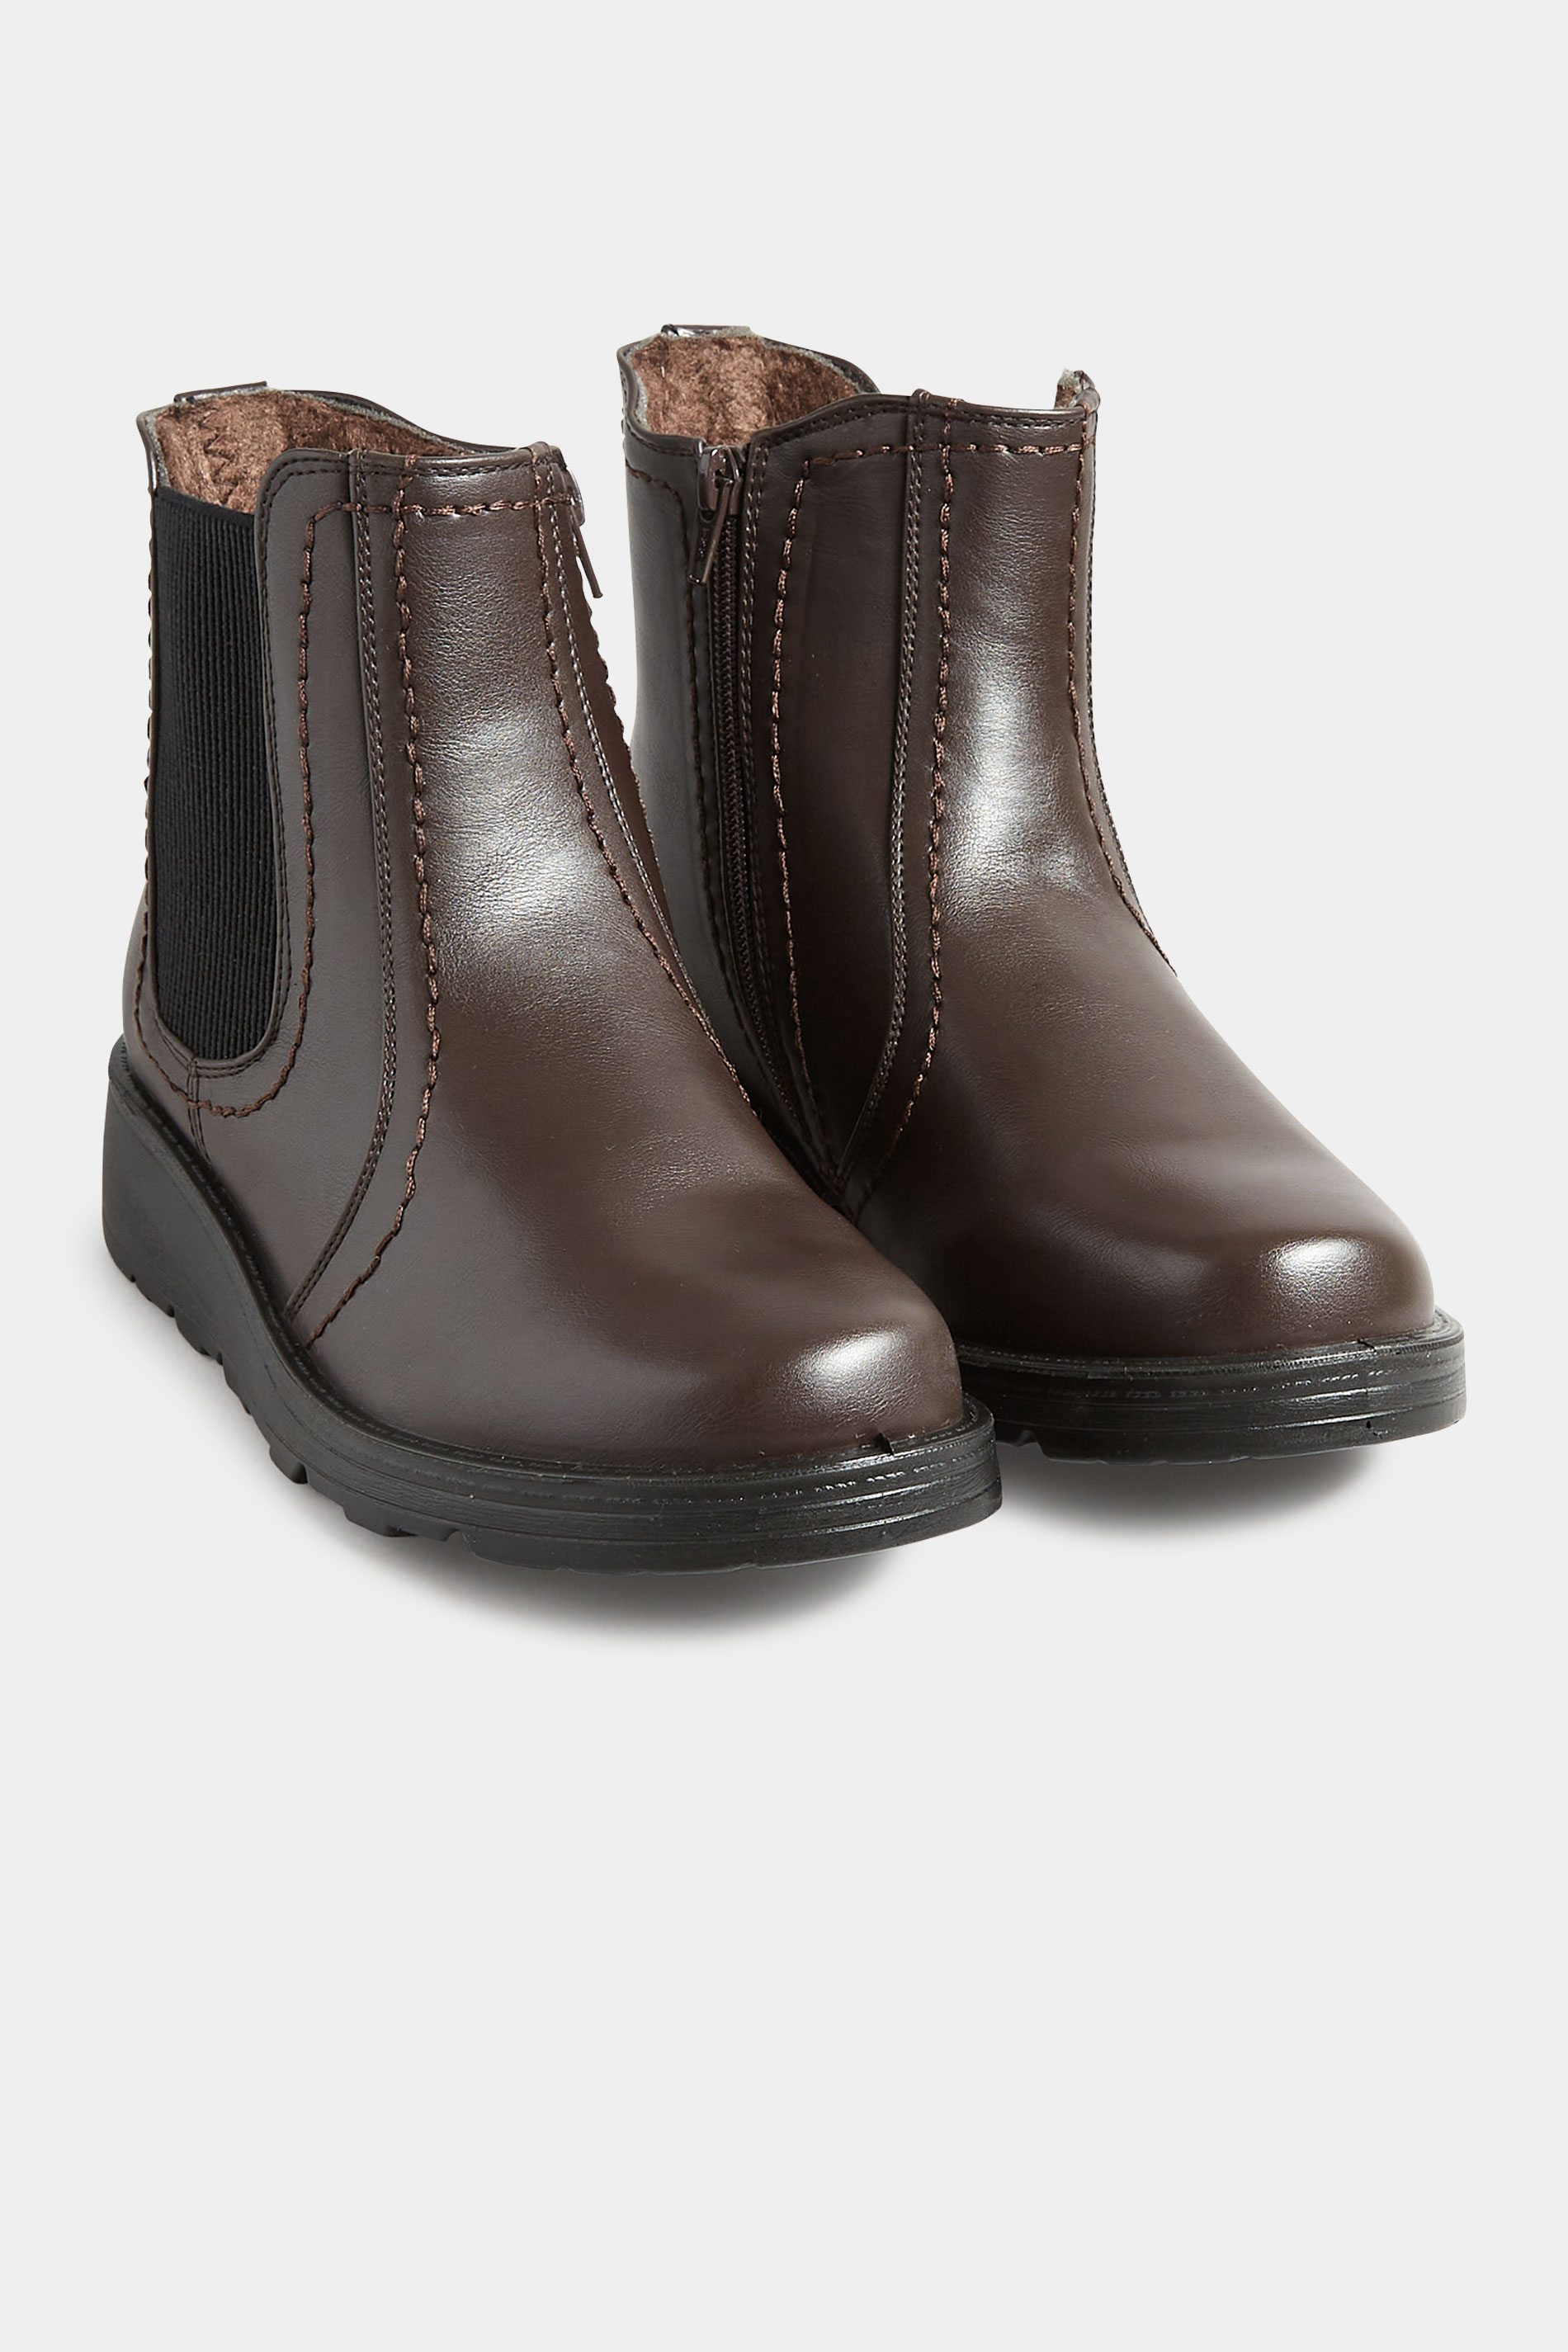 Brown Wedge Chelsea Boots In Extra Wide EEE Fit | Yours Clothing 2